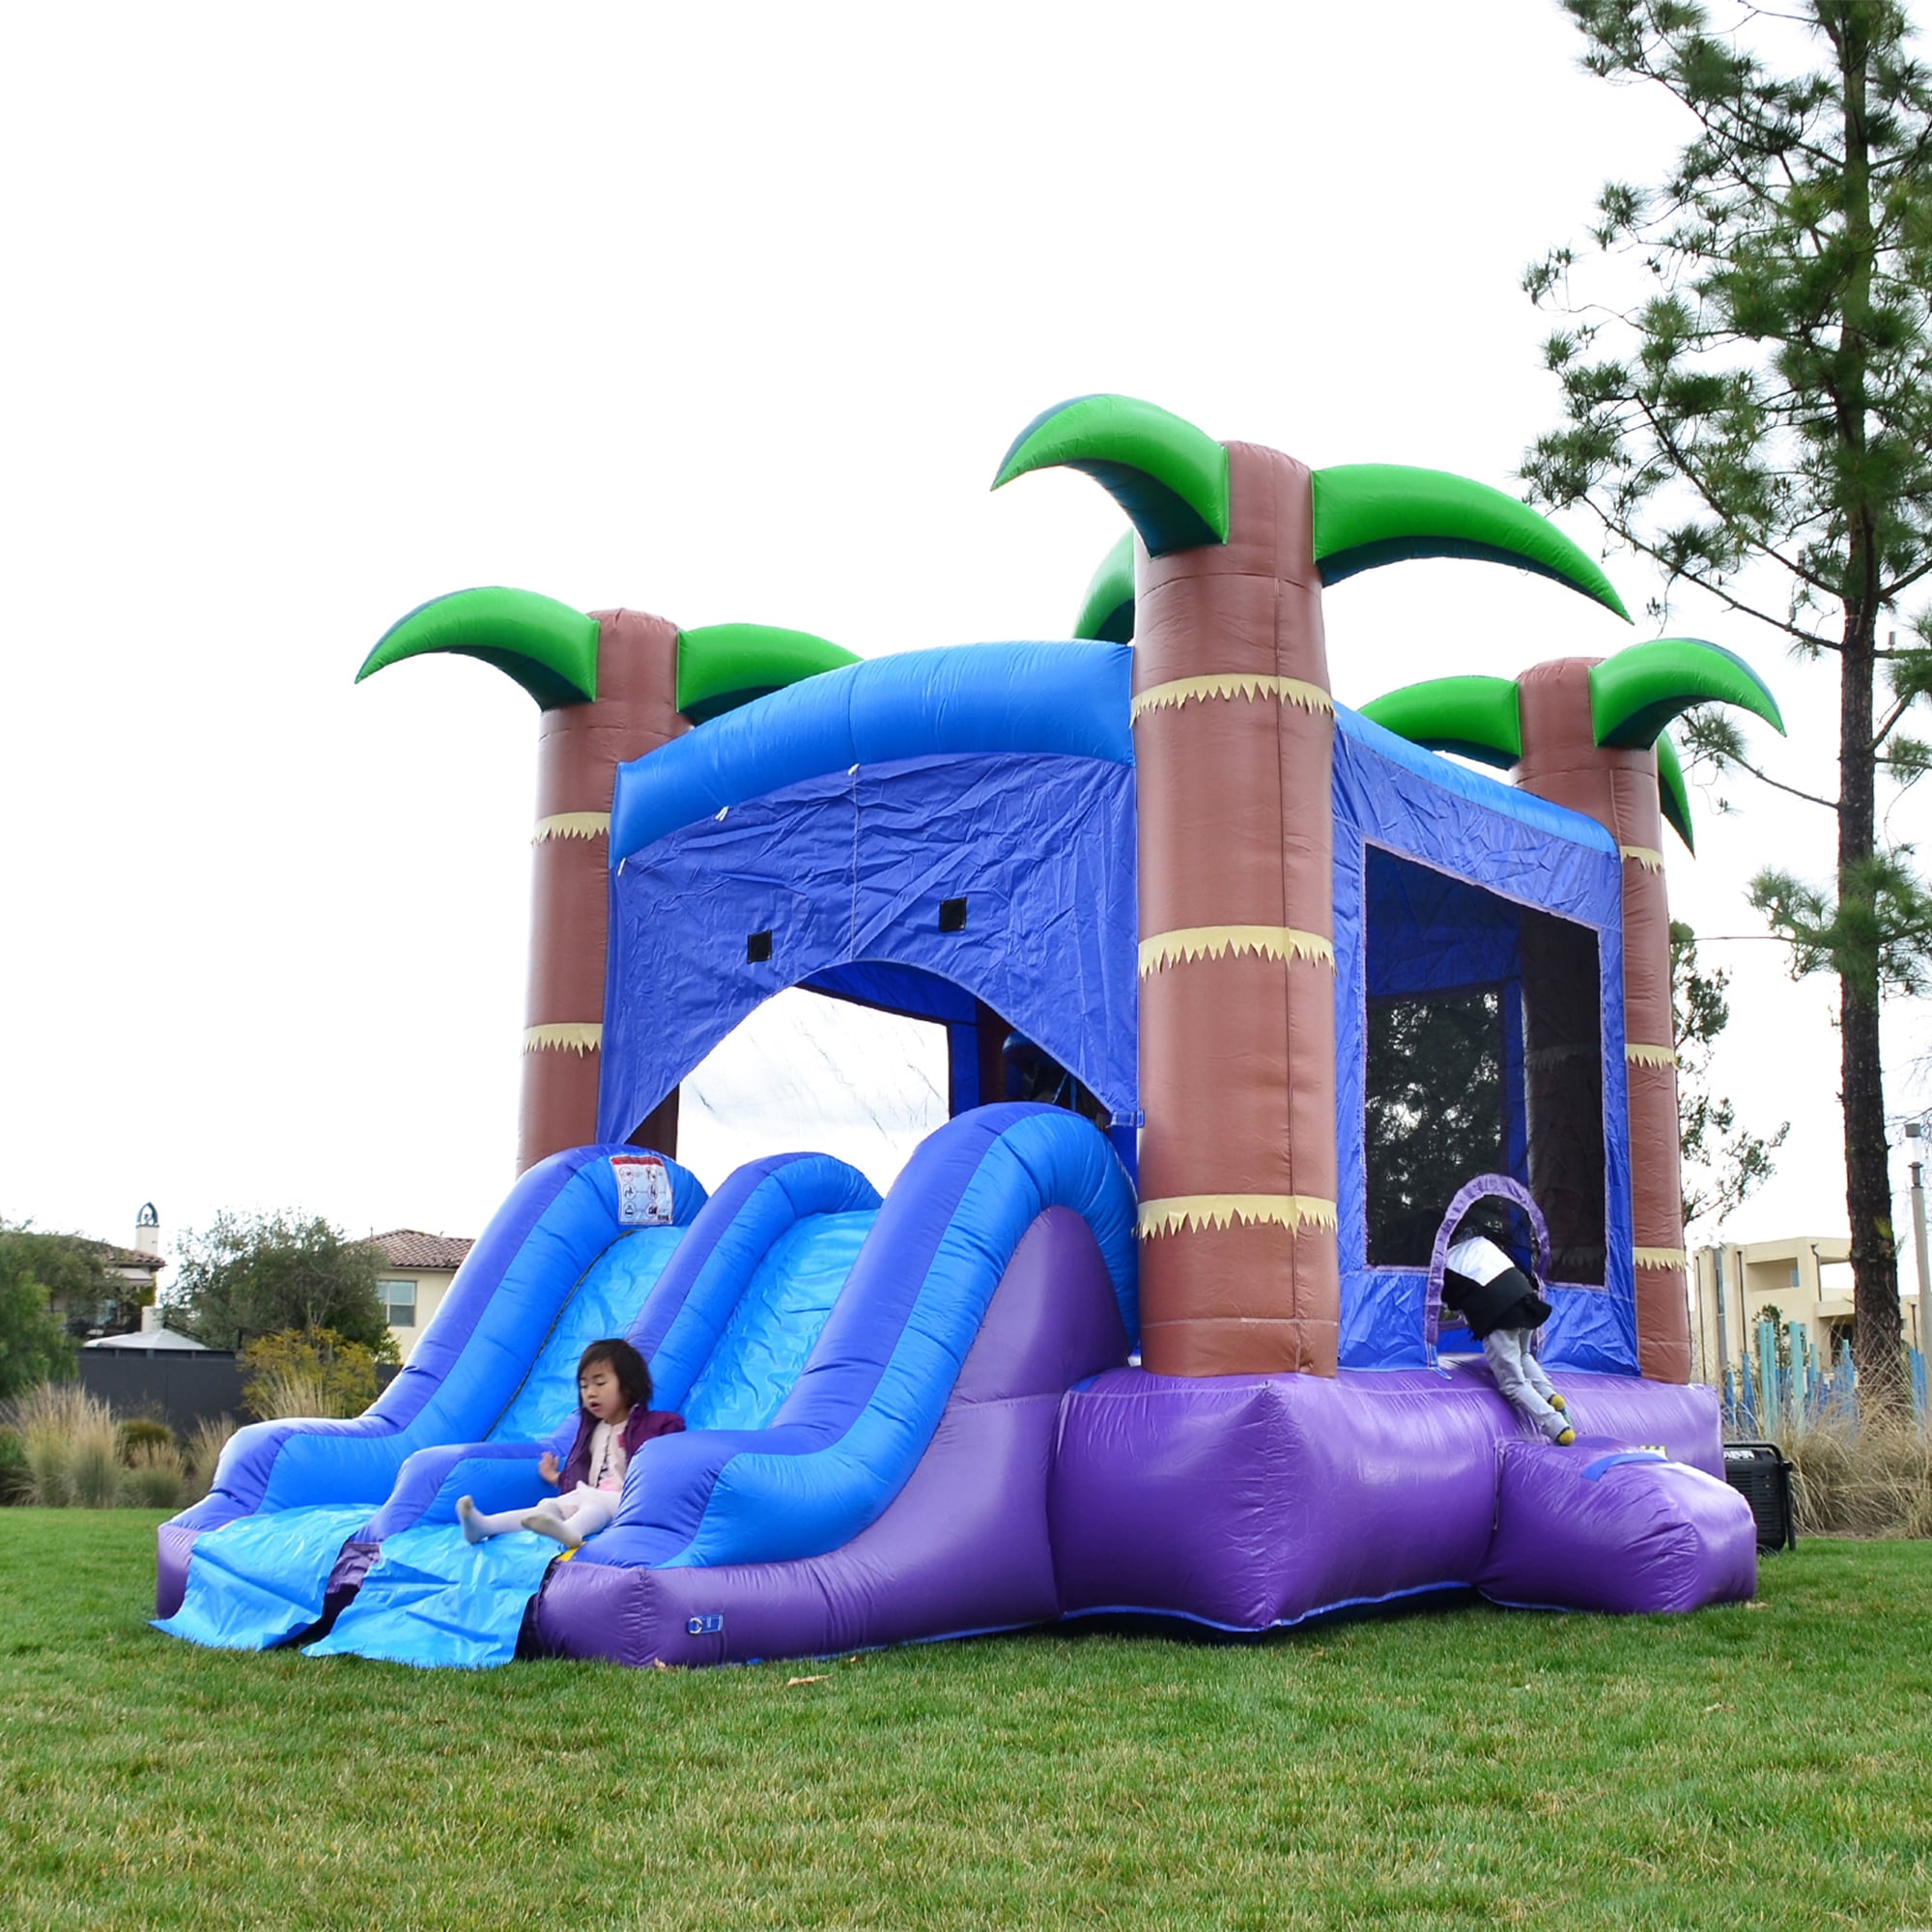 CFM Pro Commercial Inflatable Bounce House Blower 950 Watts 